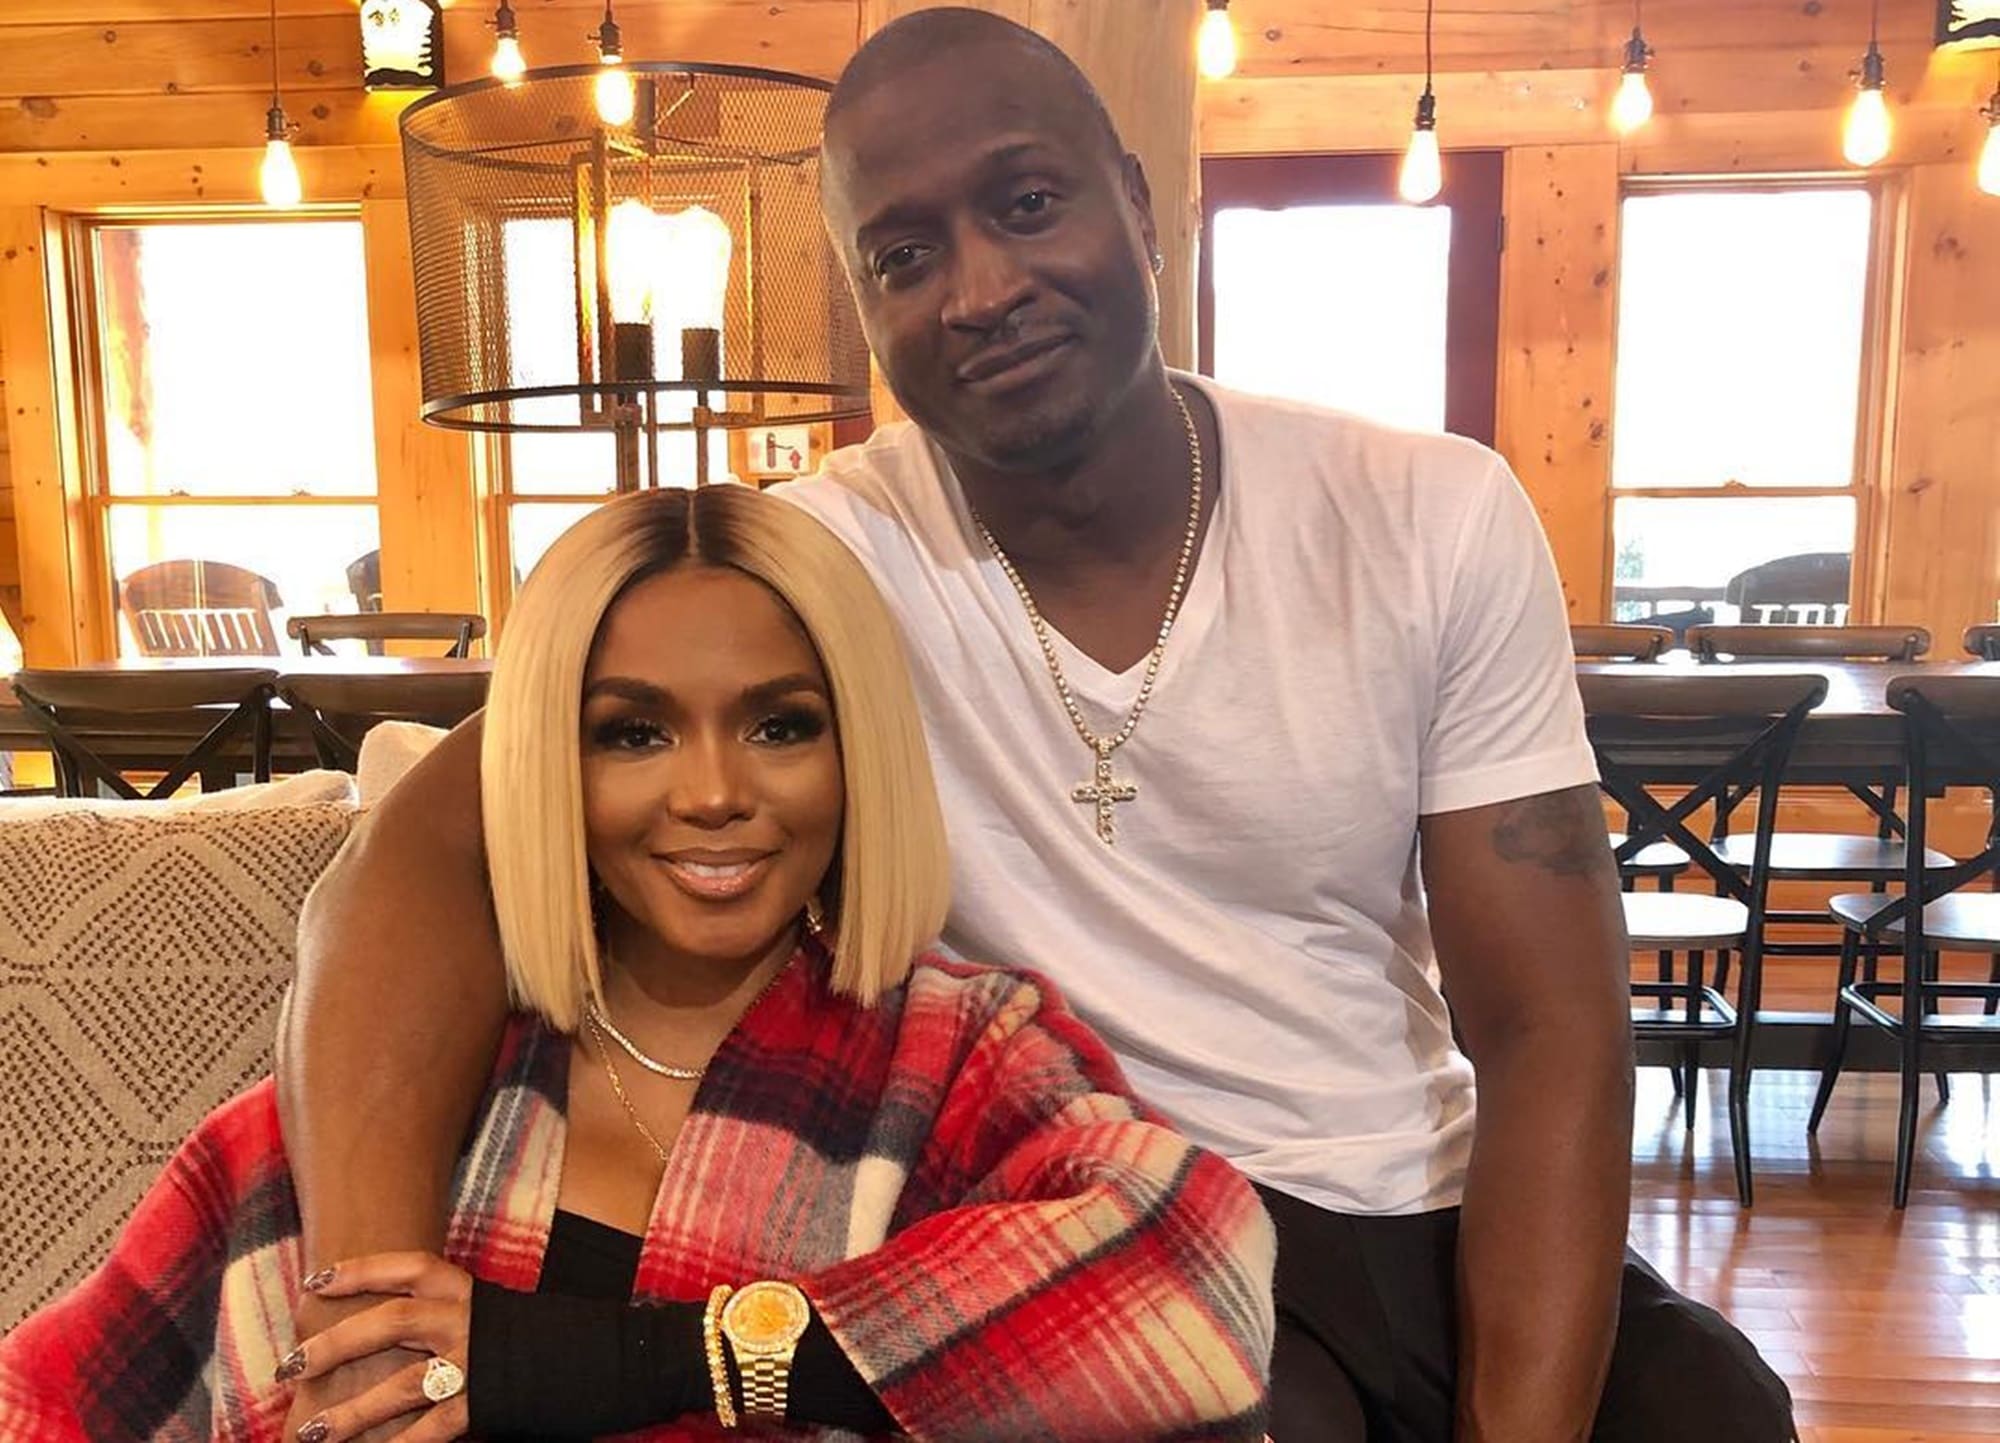 ”rasheeda-frost-catches-kirk-off-guard-with-surprise-birthday-cake-and-touching-words-pictures-prove-that-love-hip-hop-atlanta-star-jasmine-washington-is-ancient-history”